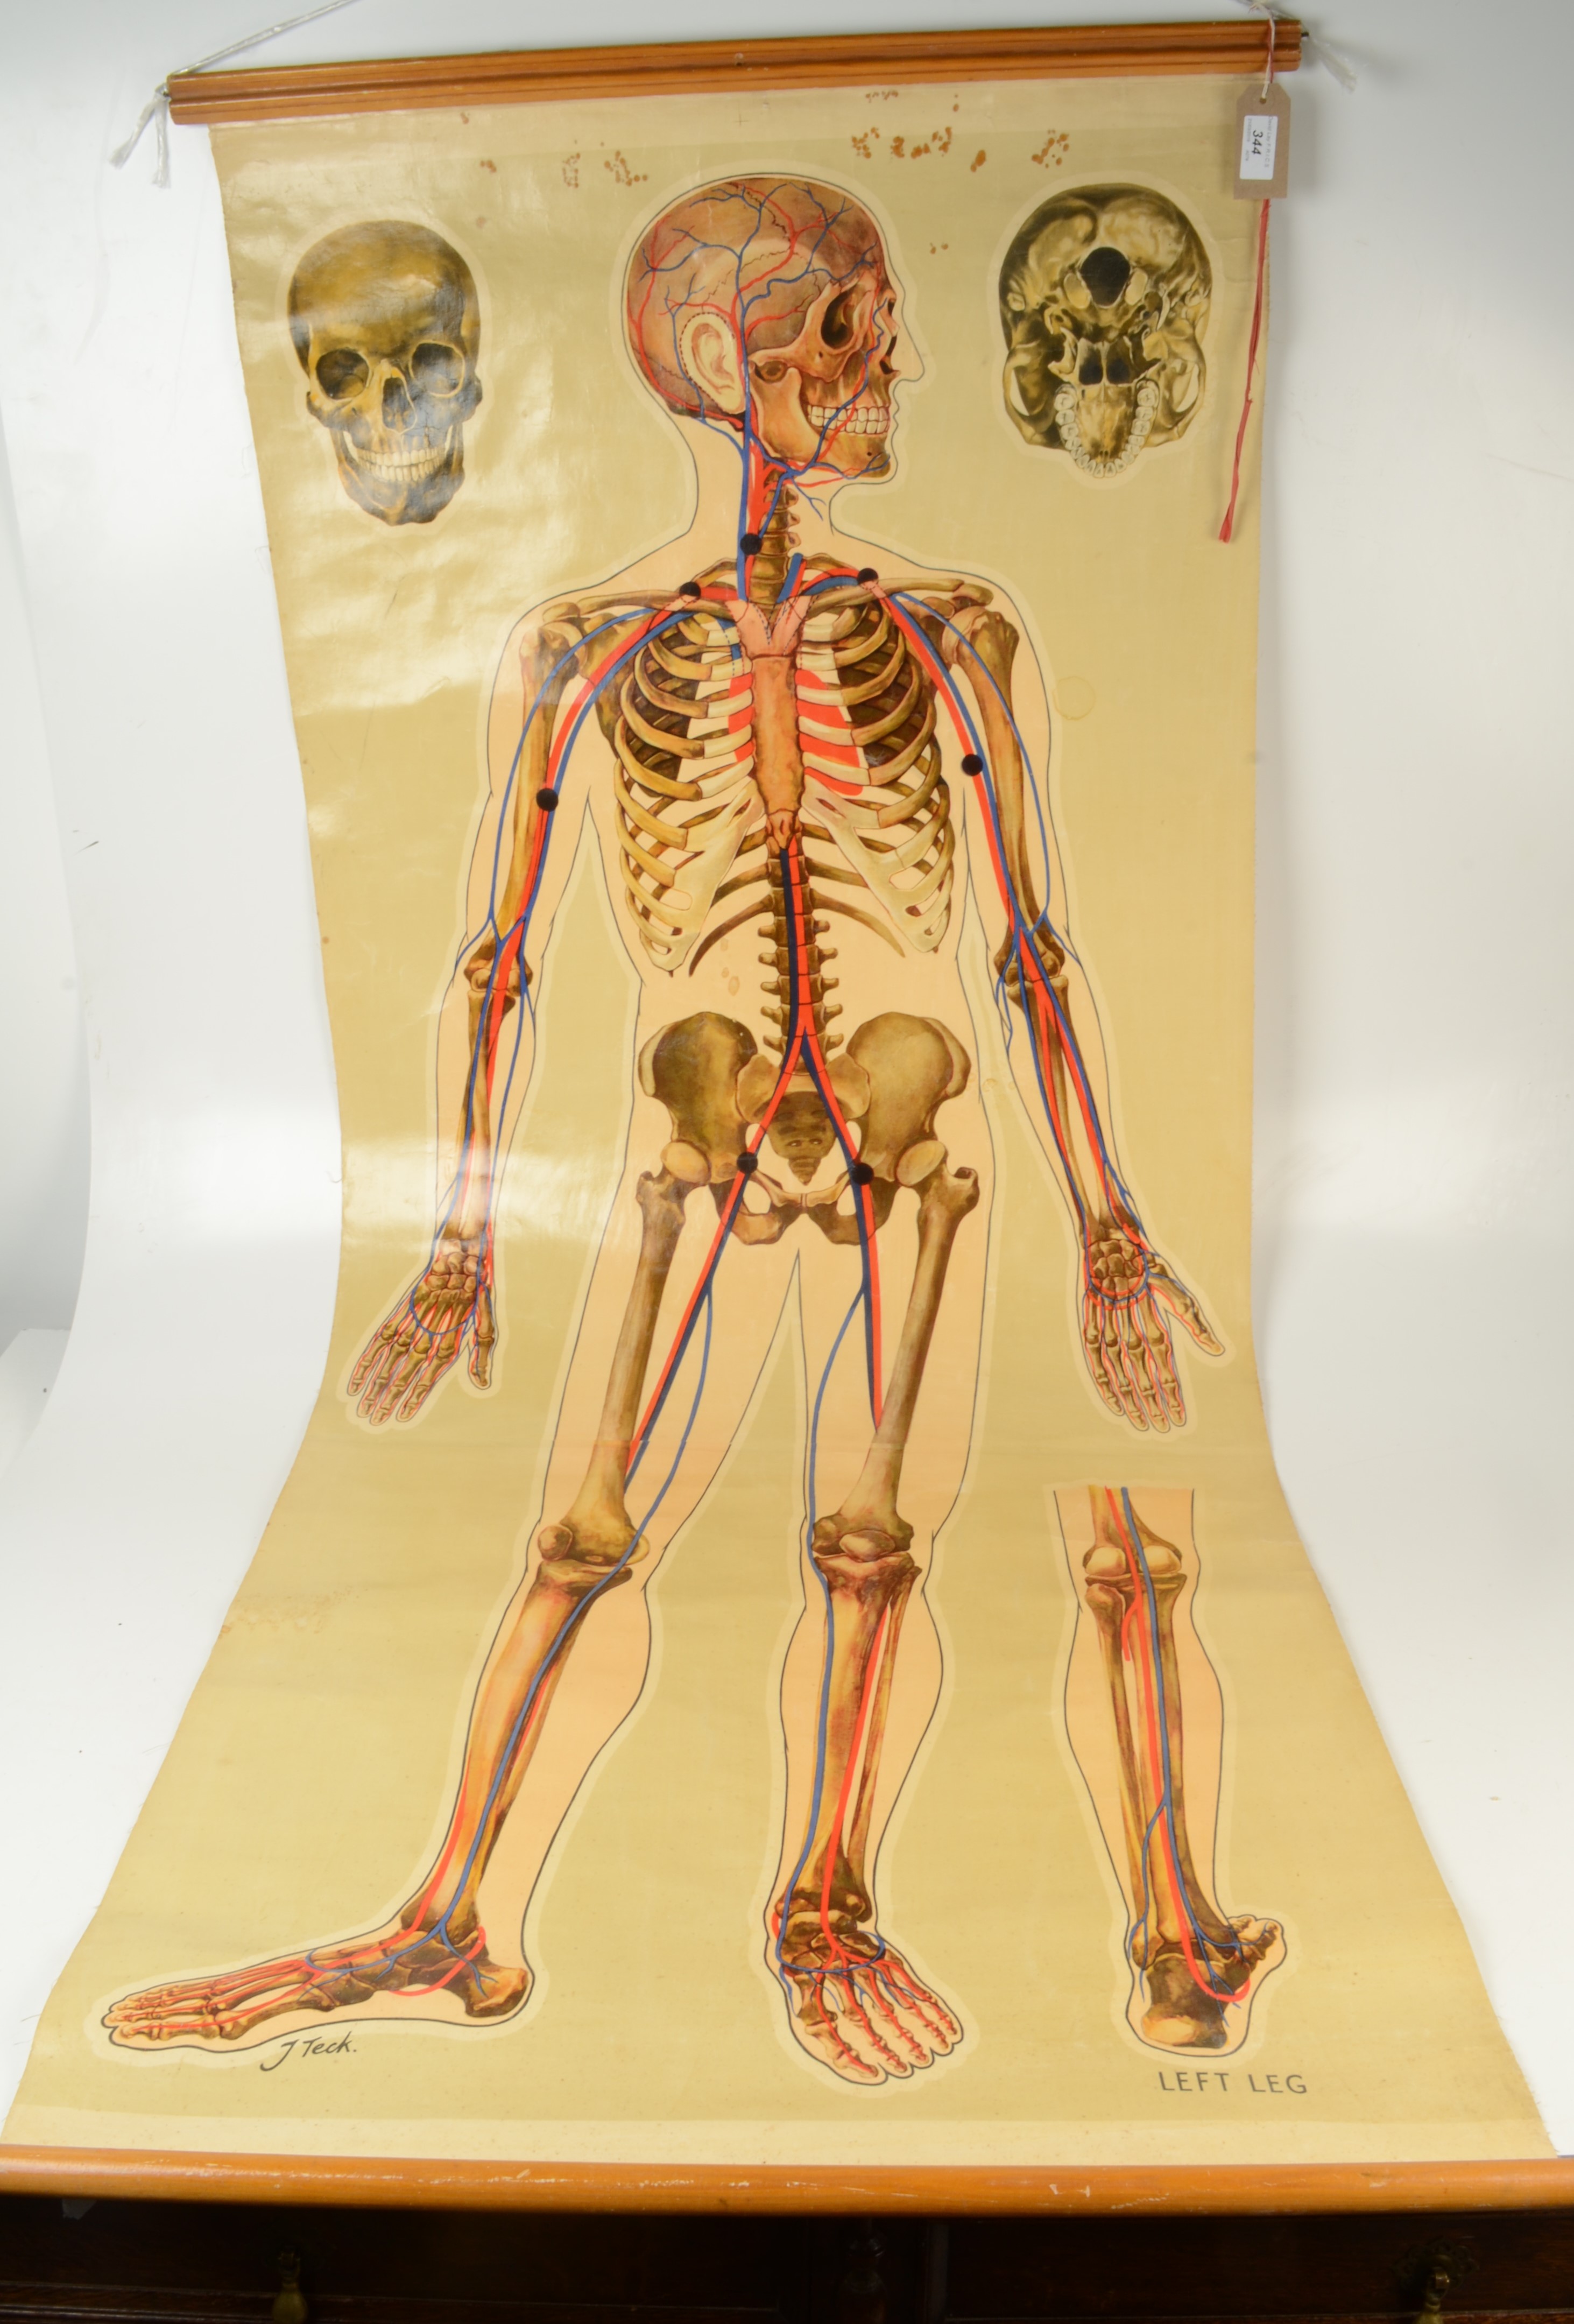 A 1930s anatomical chart, of a human skeleton, by J.